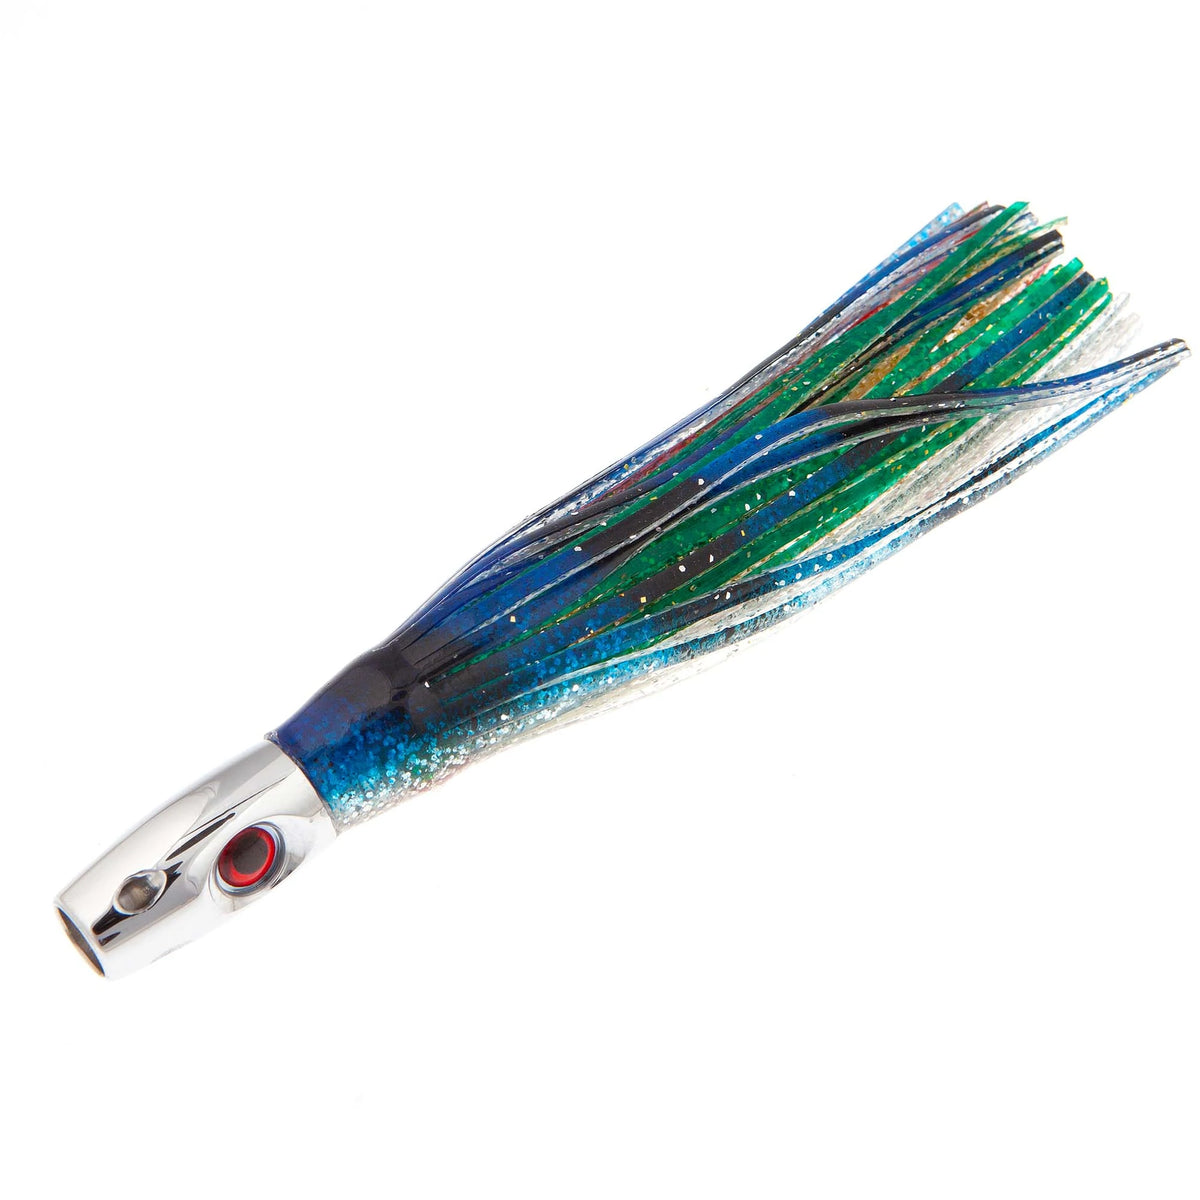 Offshore Angler Saltwater Trolling Lures